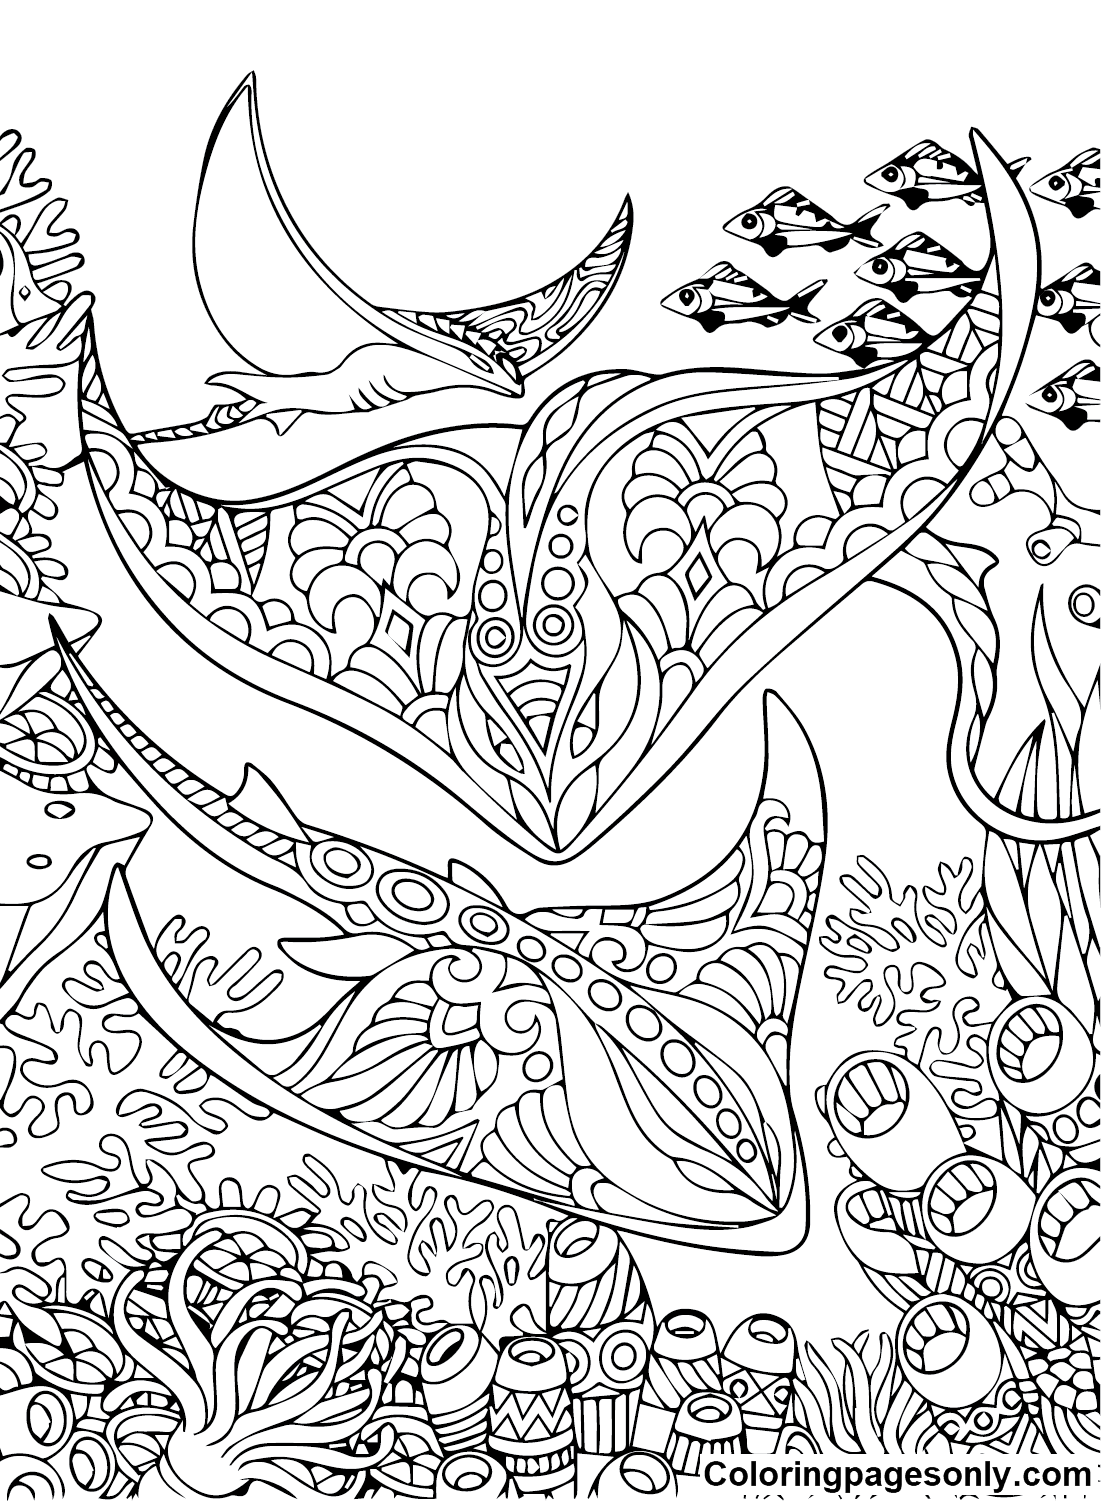 Stingray color Sheets Coloring Pages